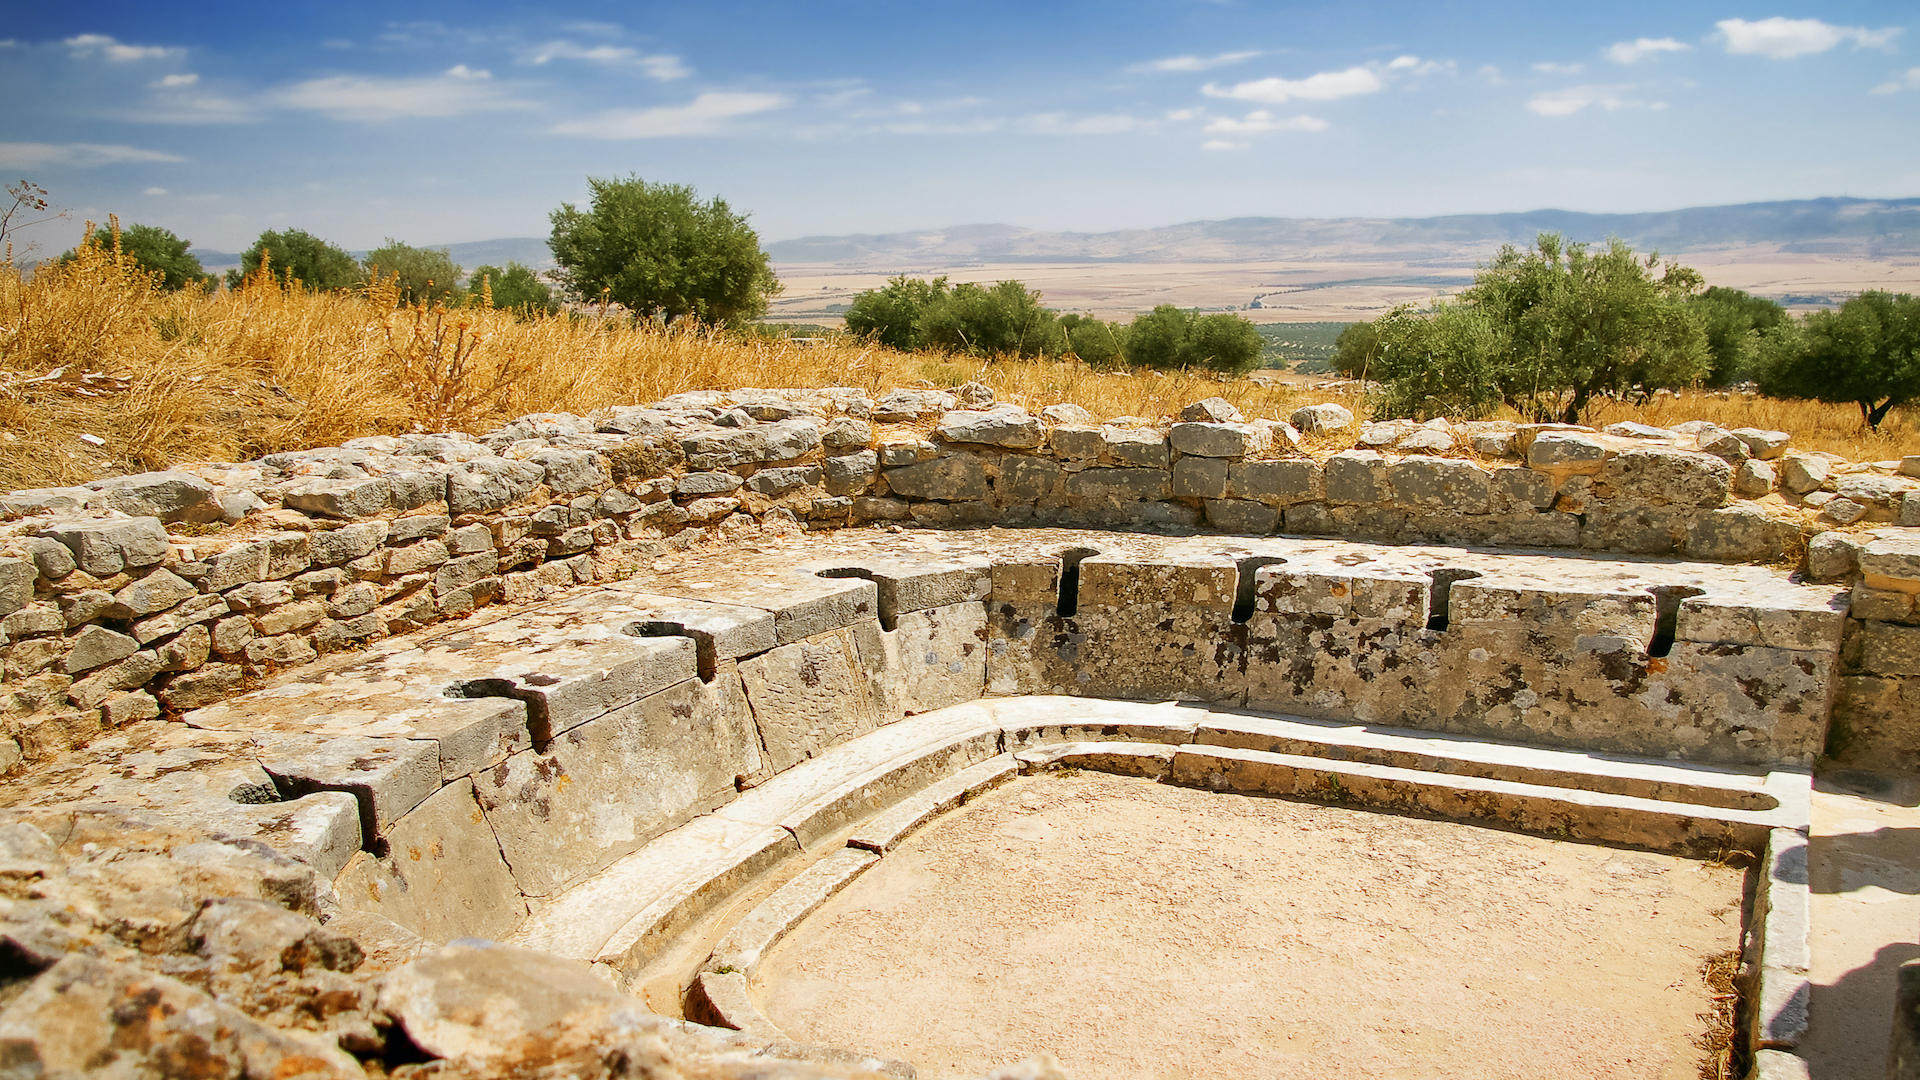 A photo of an ancient public toilet from Roman times. We see a curved stone bench with holes where people sat to do their business.